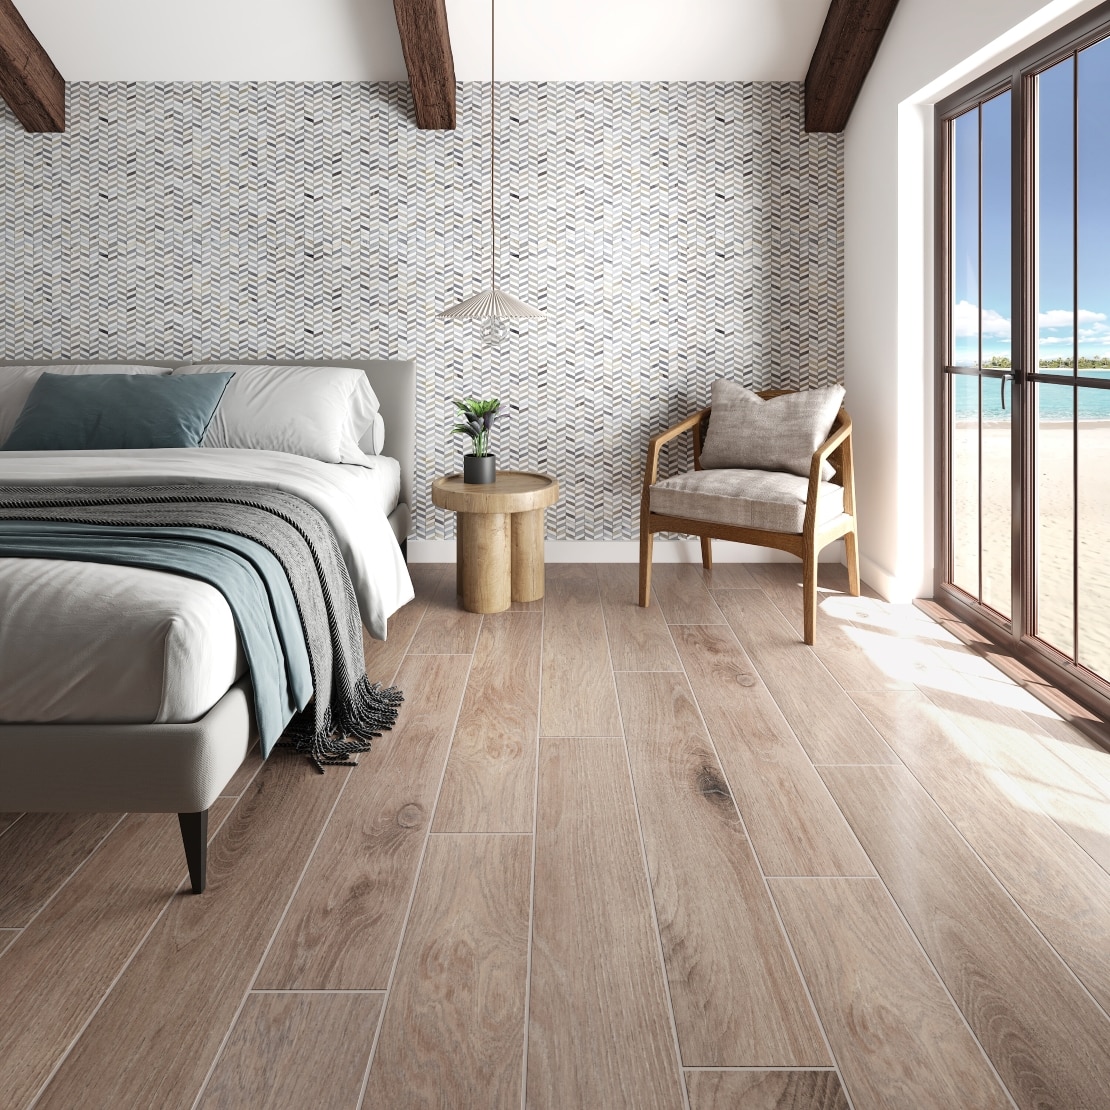 Beach house bedroom with tile that looks like wood planks, mosaic tiled wall, and glass door leading to the beach.